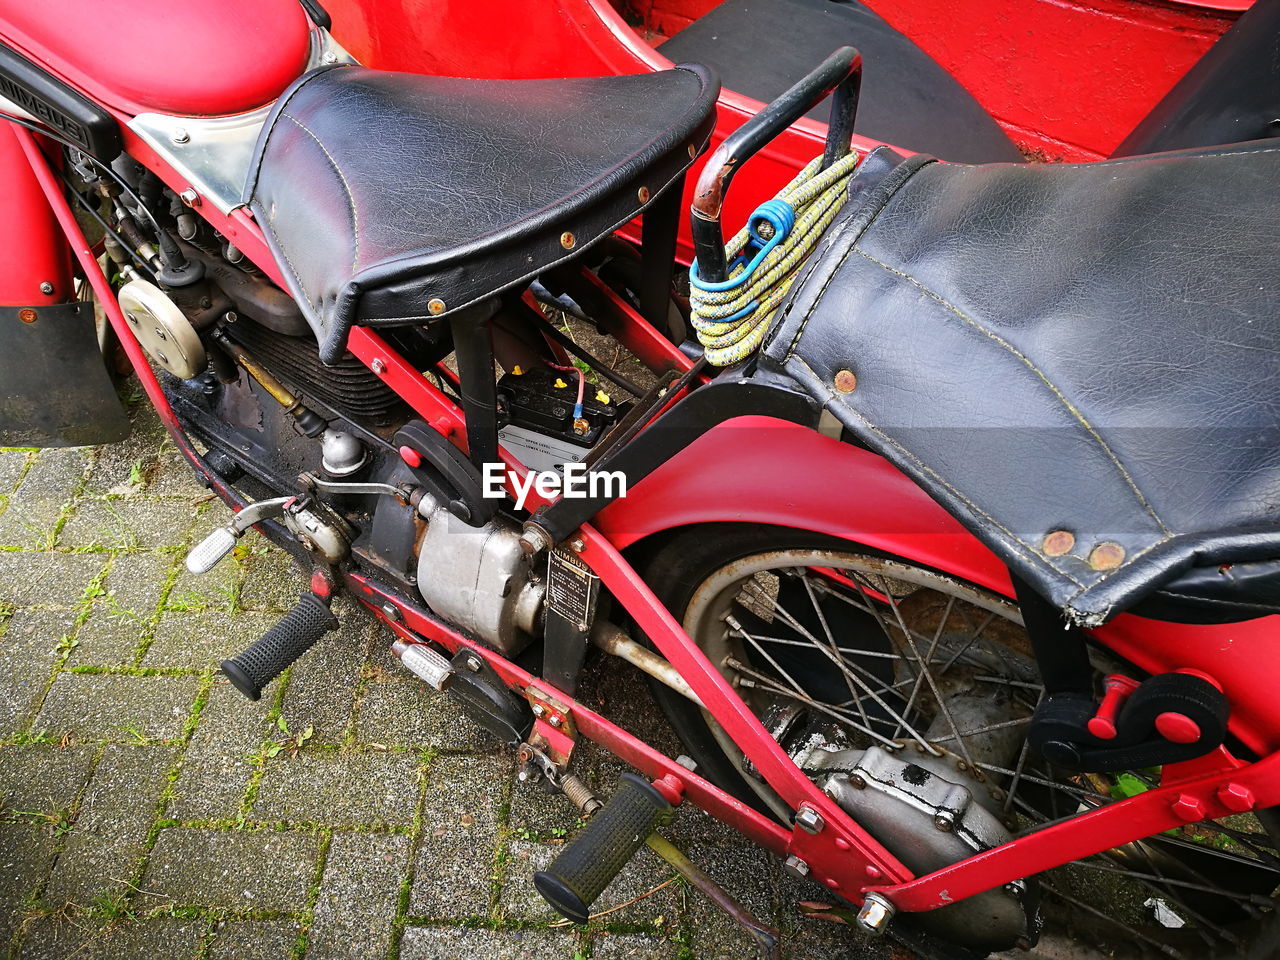 HIGH ANGLE VIEW OF RED MOTORCYCLE ON ROAD